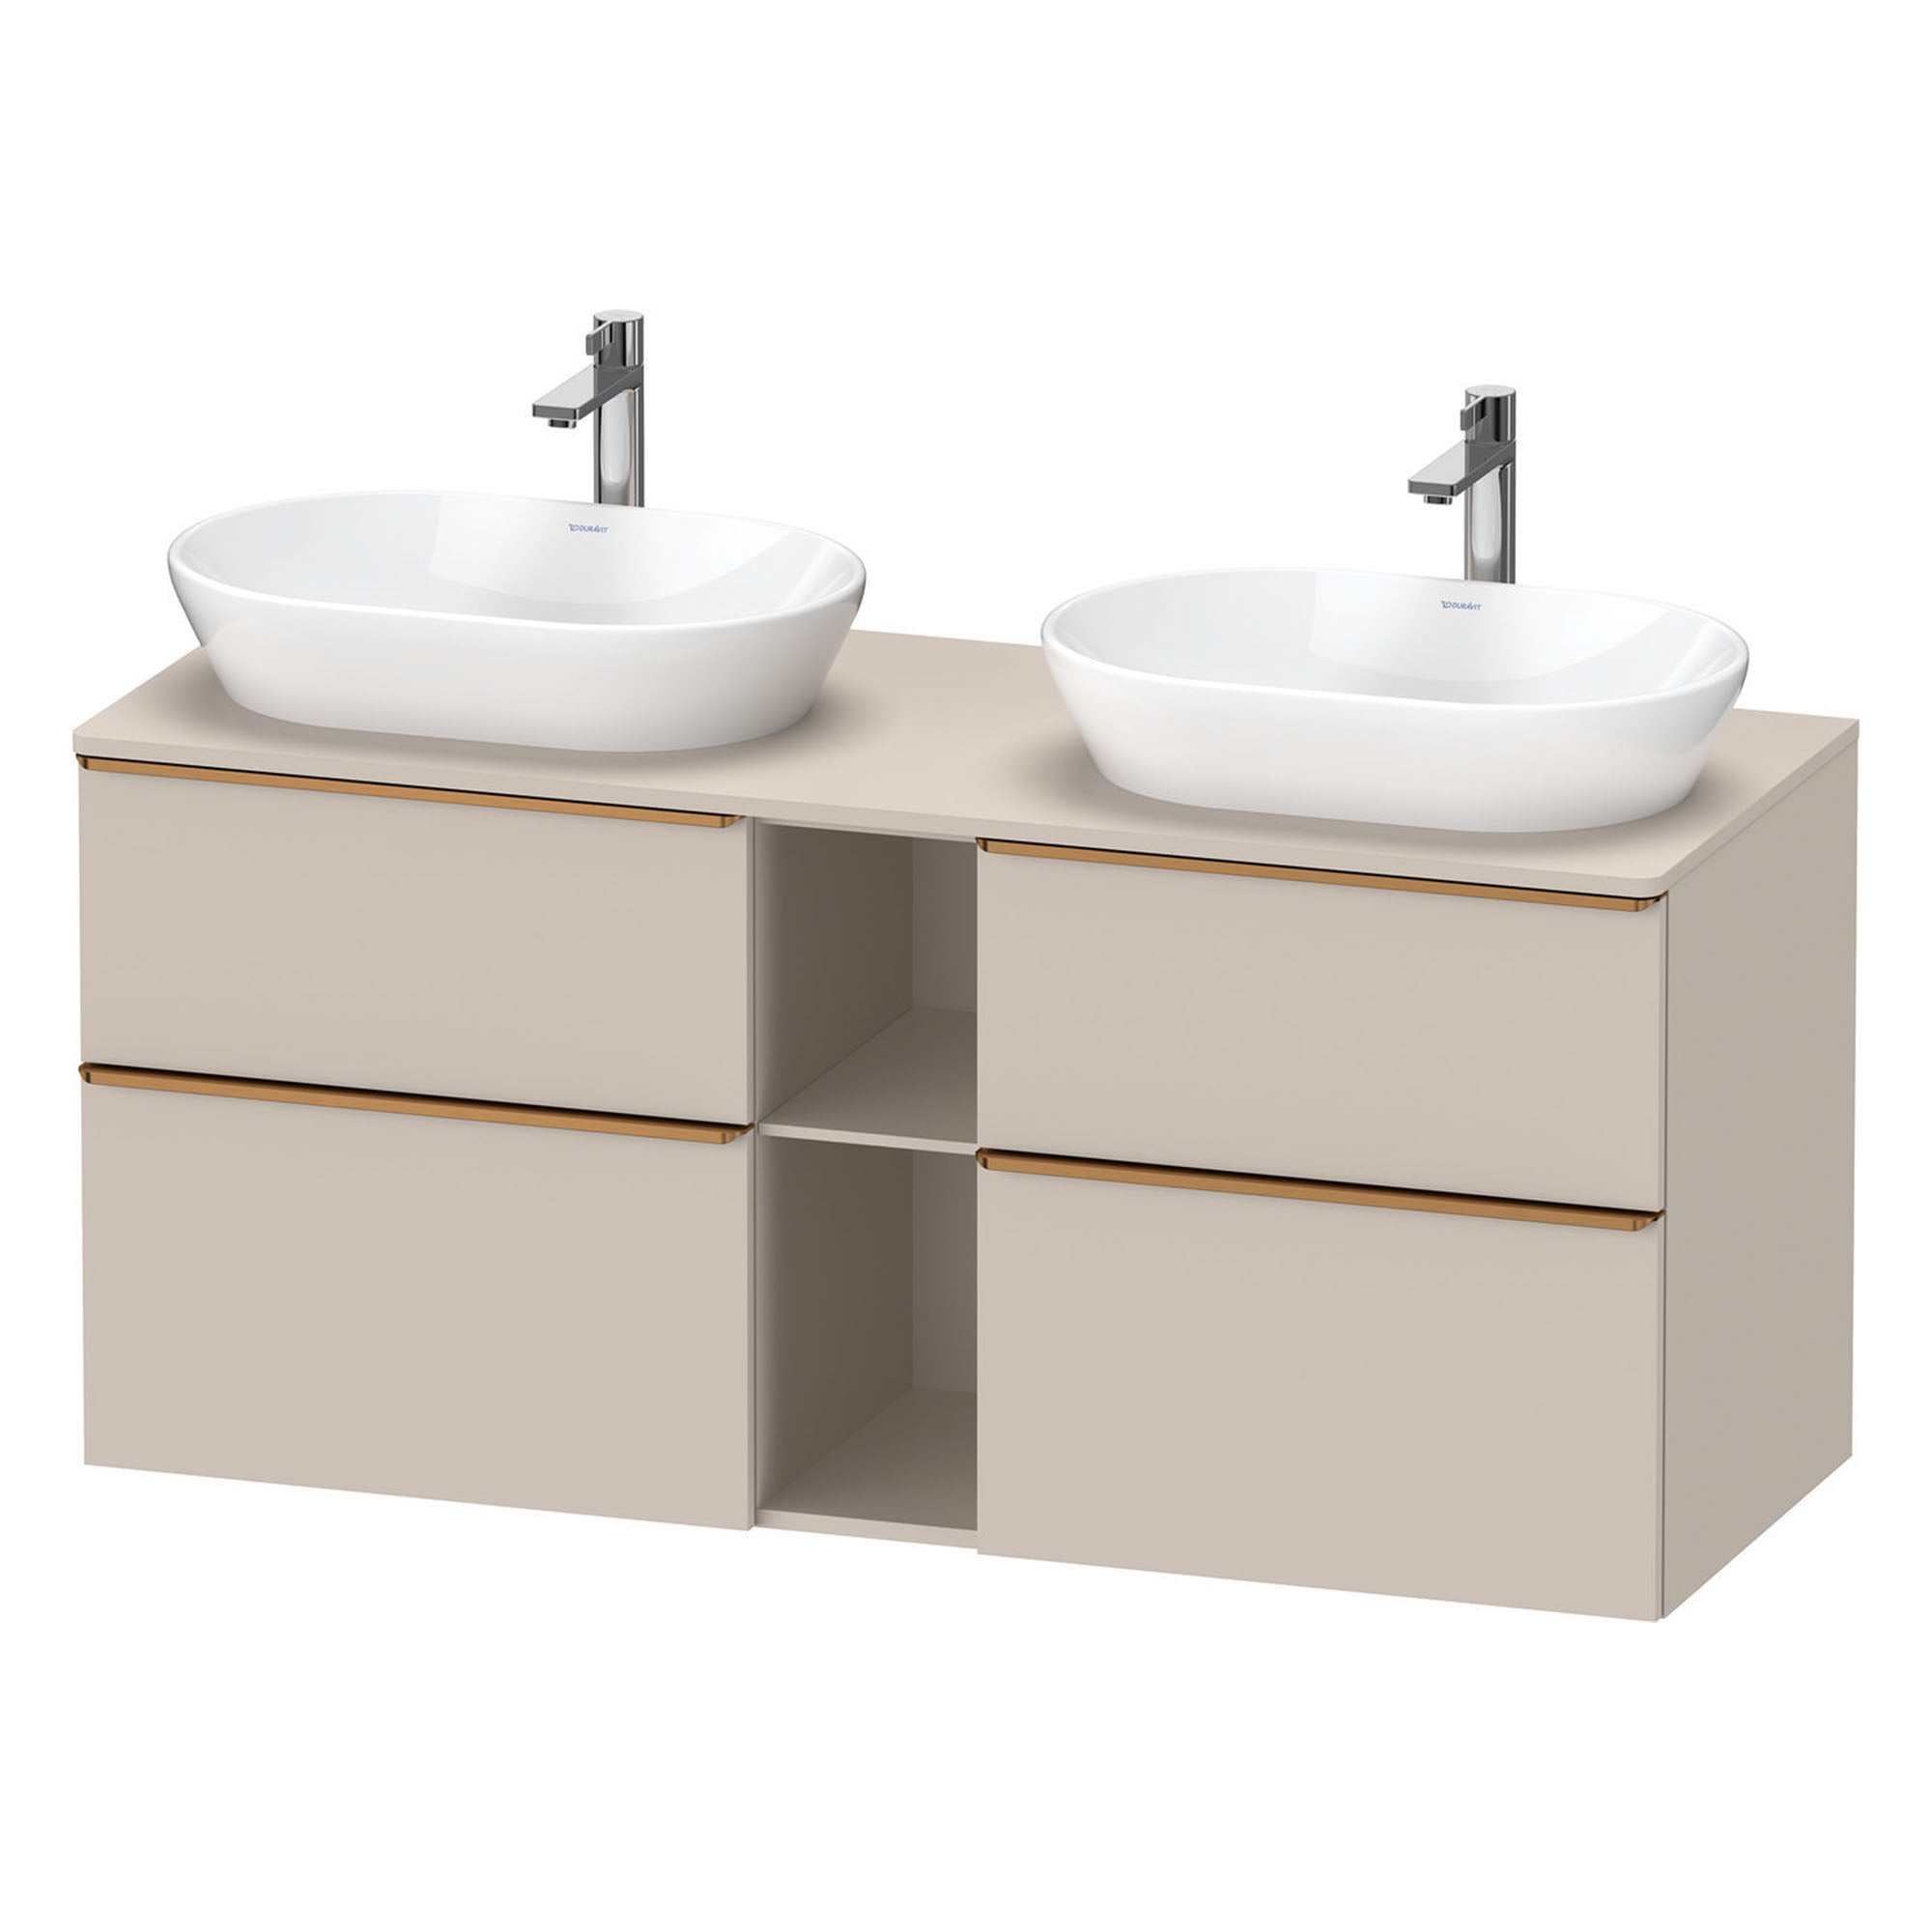 duravit d-neo 1400 wall mounted vanity unit with worktop 2 open shelves taupe brushed bronze handles